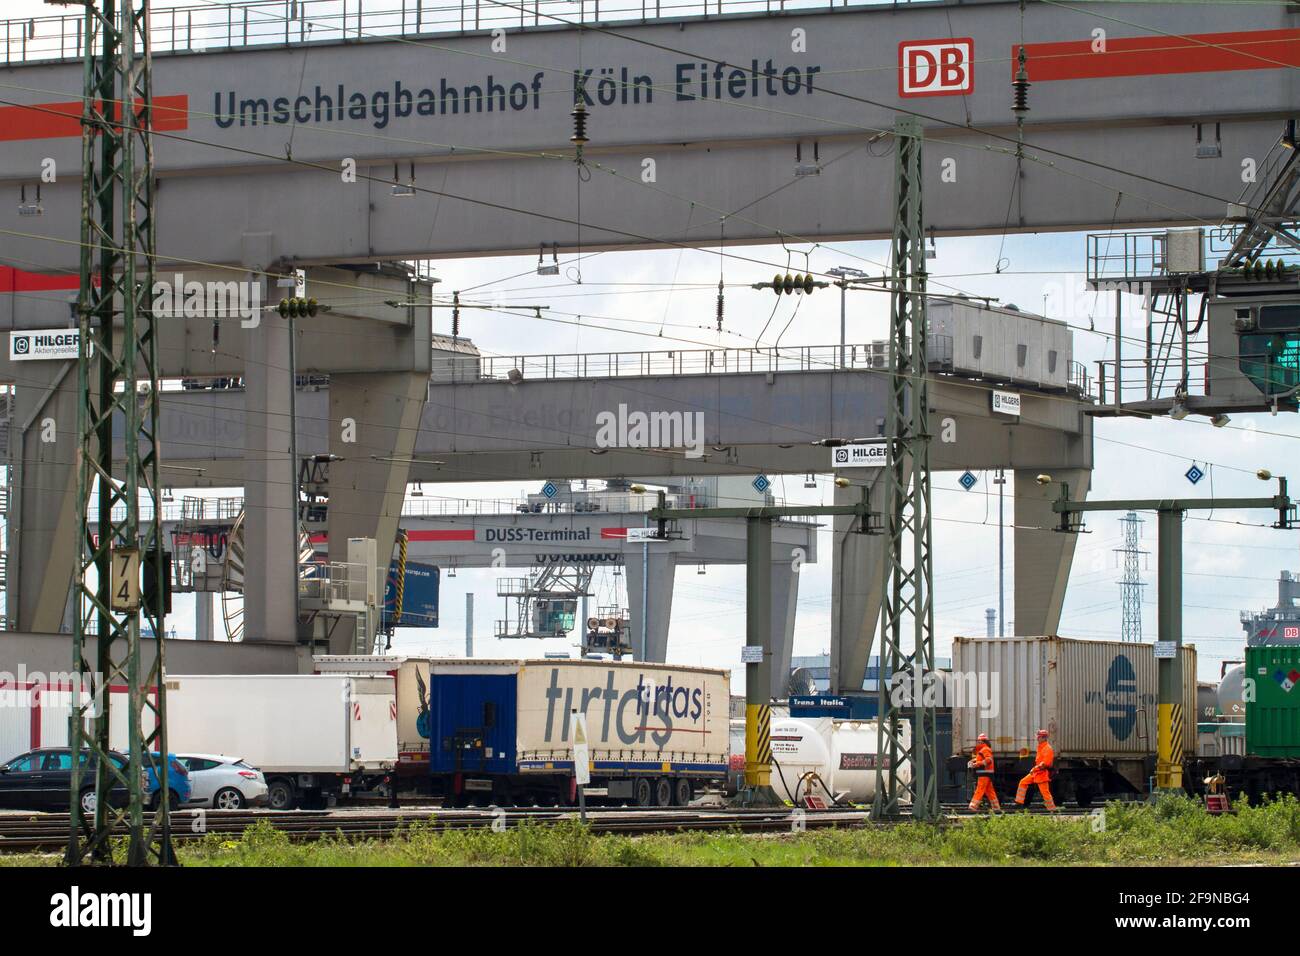 freight station Cologne Eifeltor, it is Germany's largest freight station for combined rail-road freight, Cologne, Germany. der Gueterbahnhof Koeln Ei Stock Photo